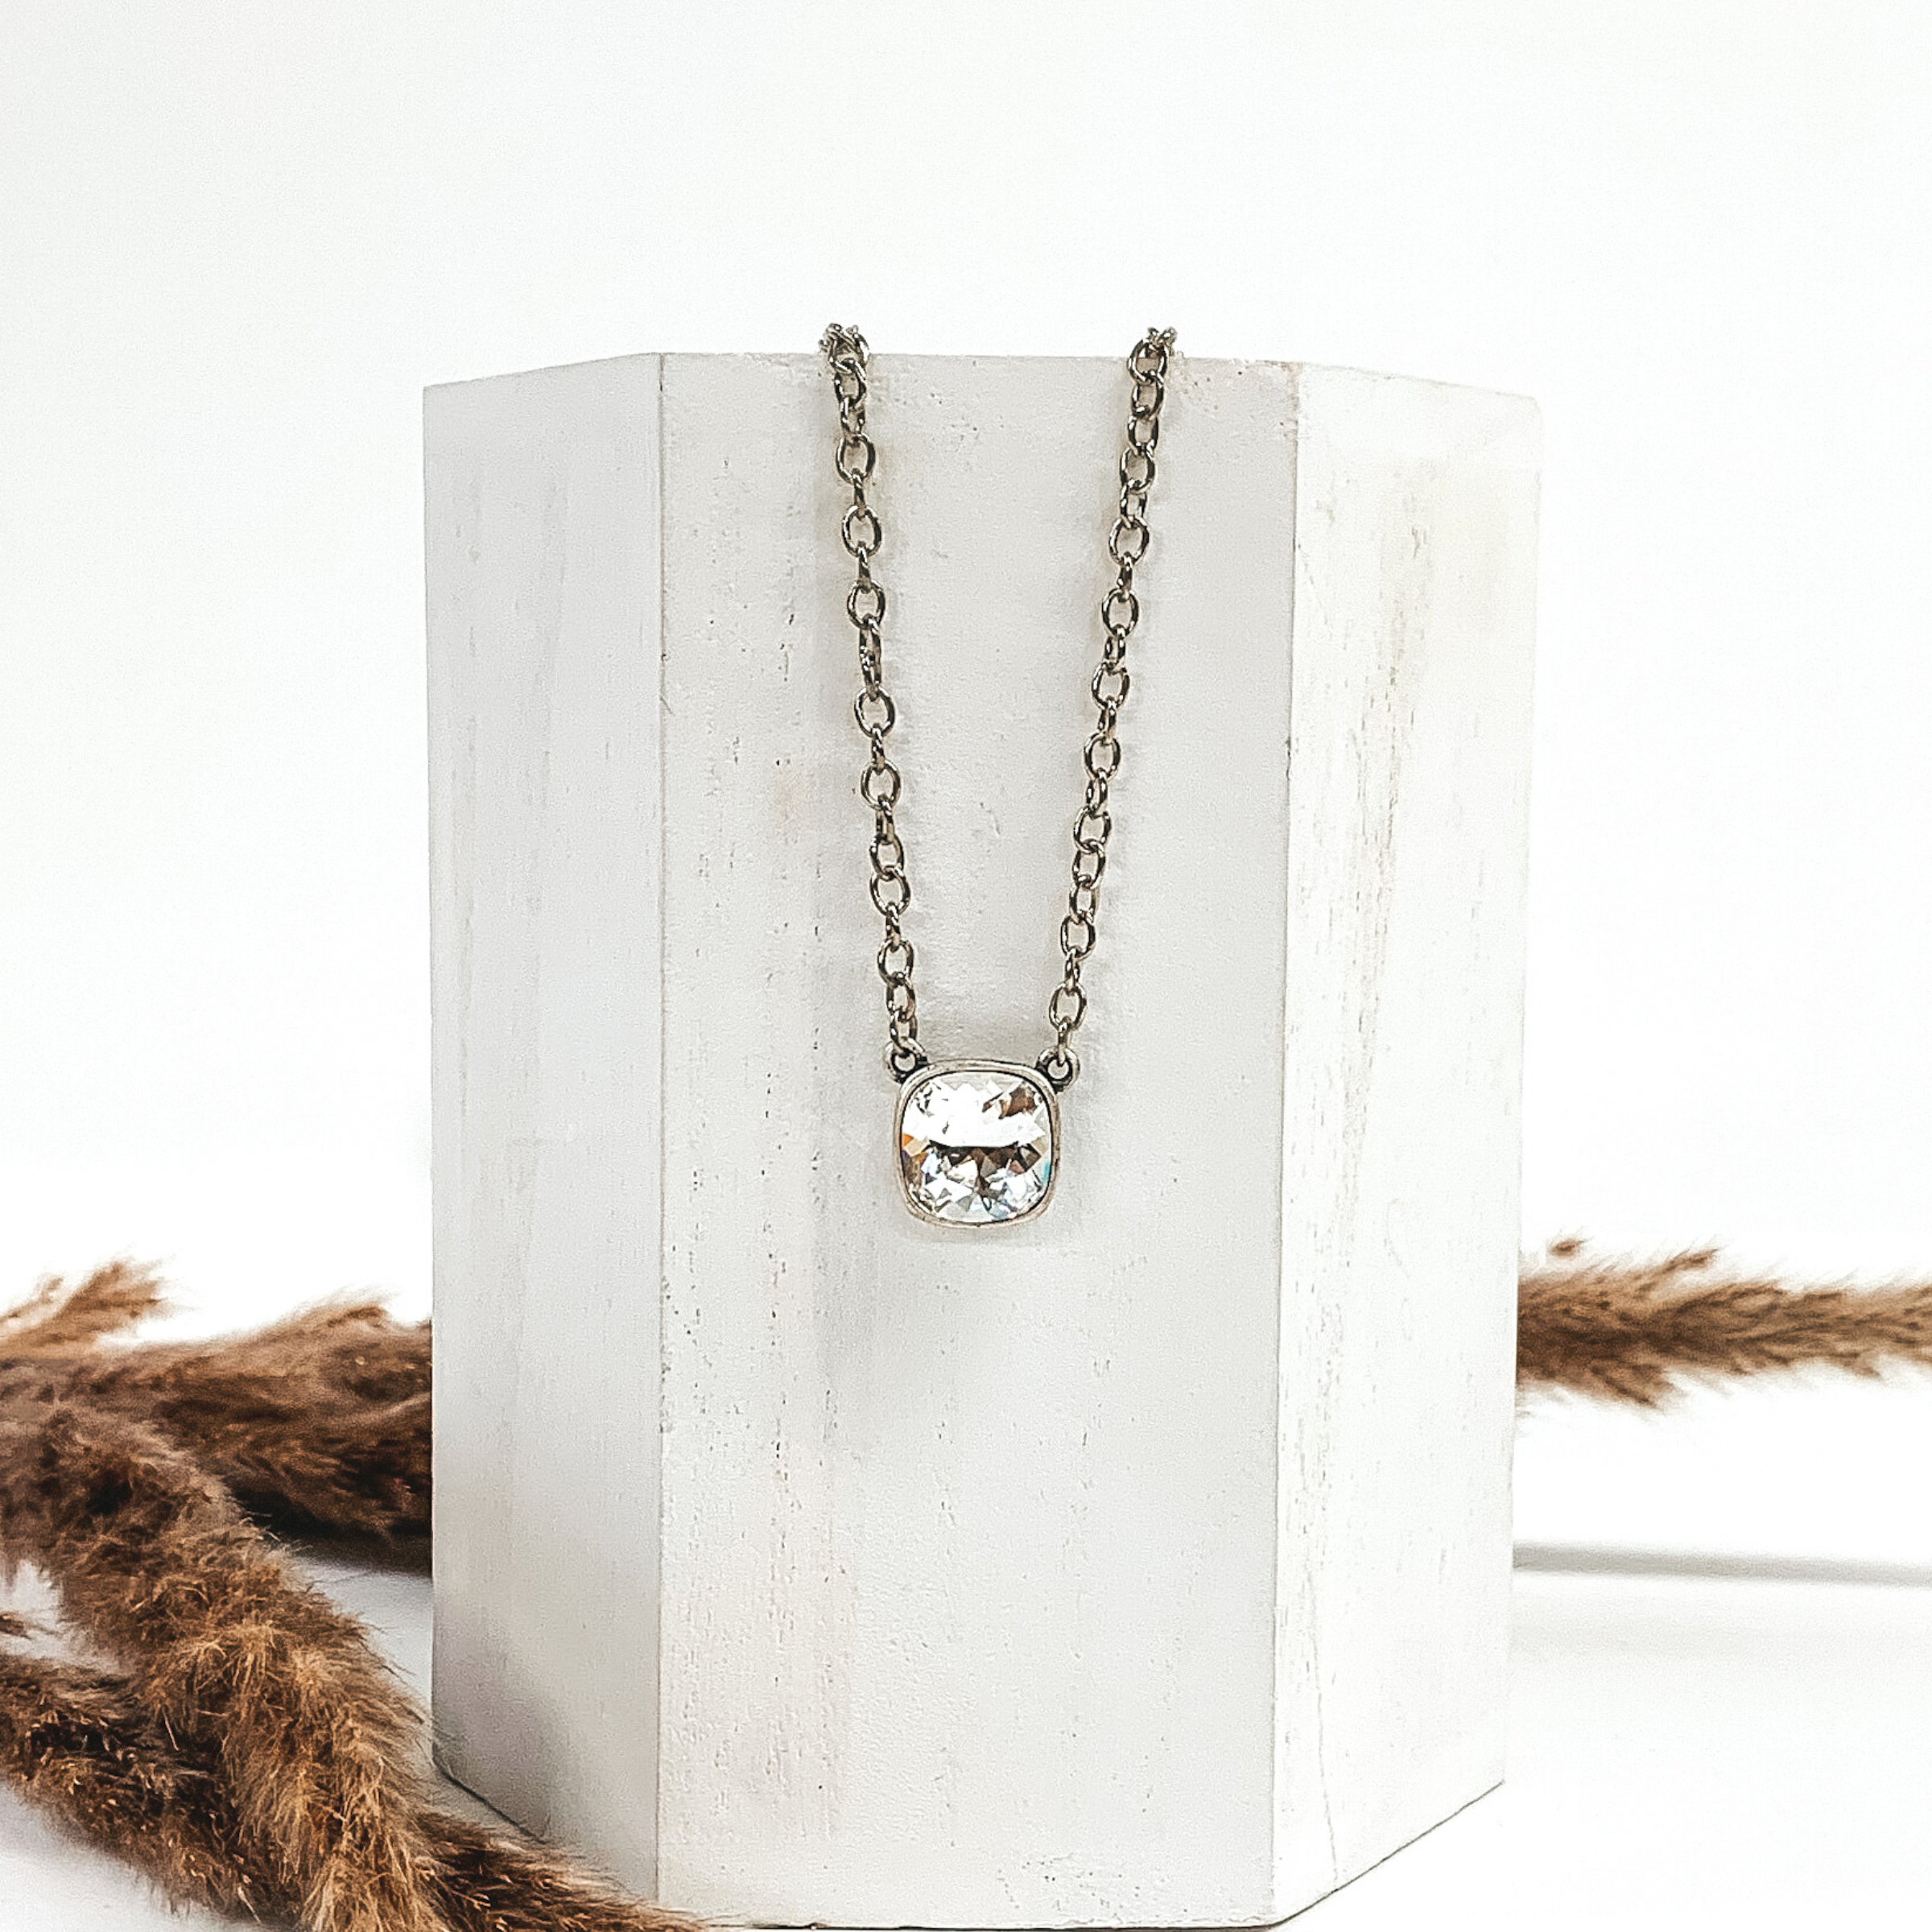 Silver chained necklace with a square clear crystal. This necklace is hanging on a white block next to brown floral decor. 